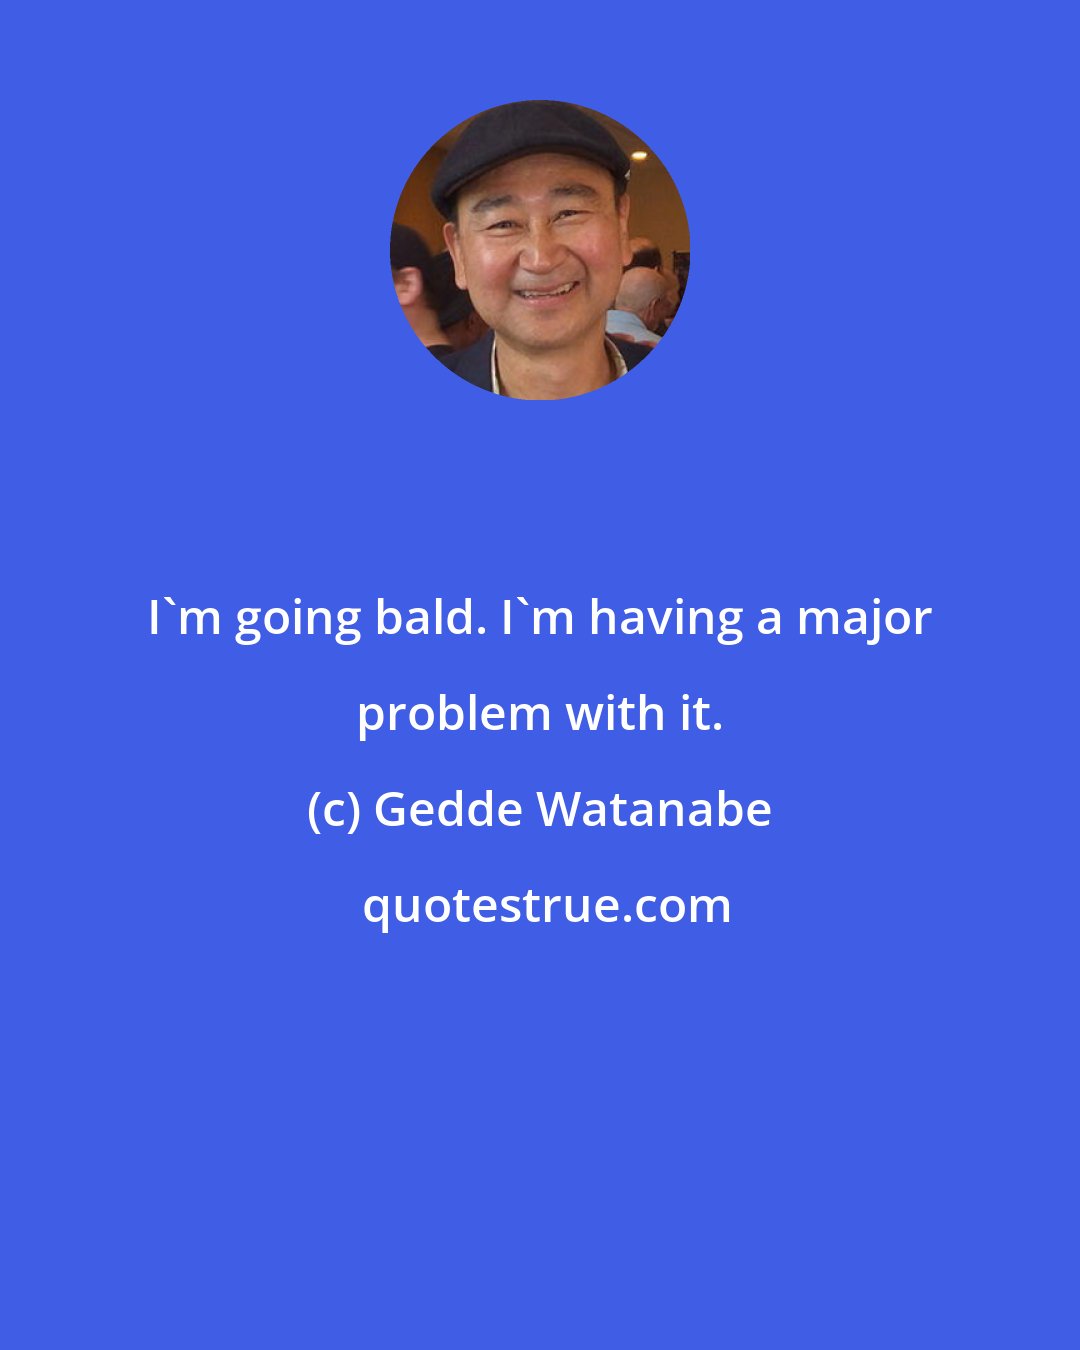 Gedde Watanabe: I'm going bald. I'm having a major problem with it.